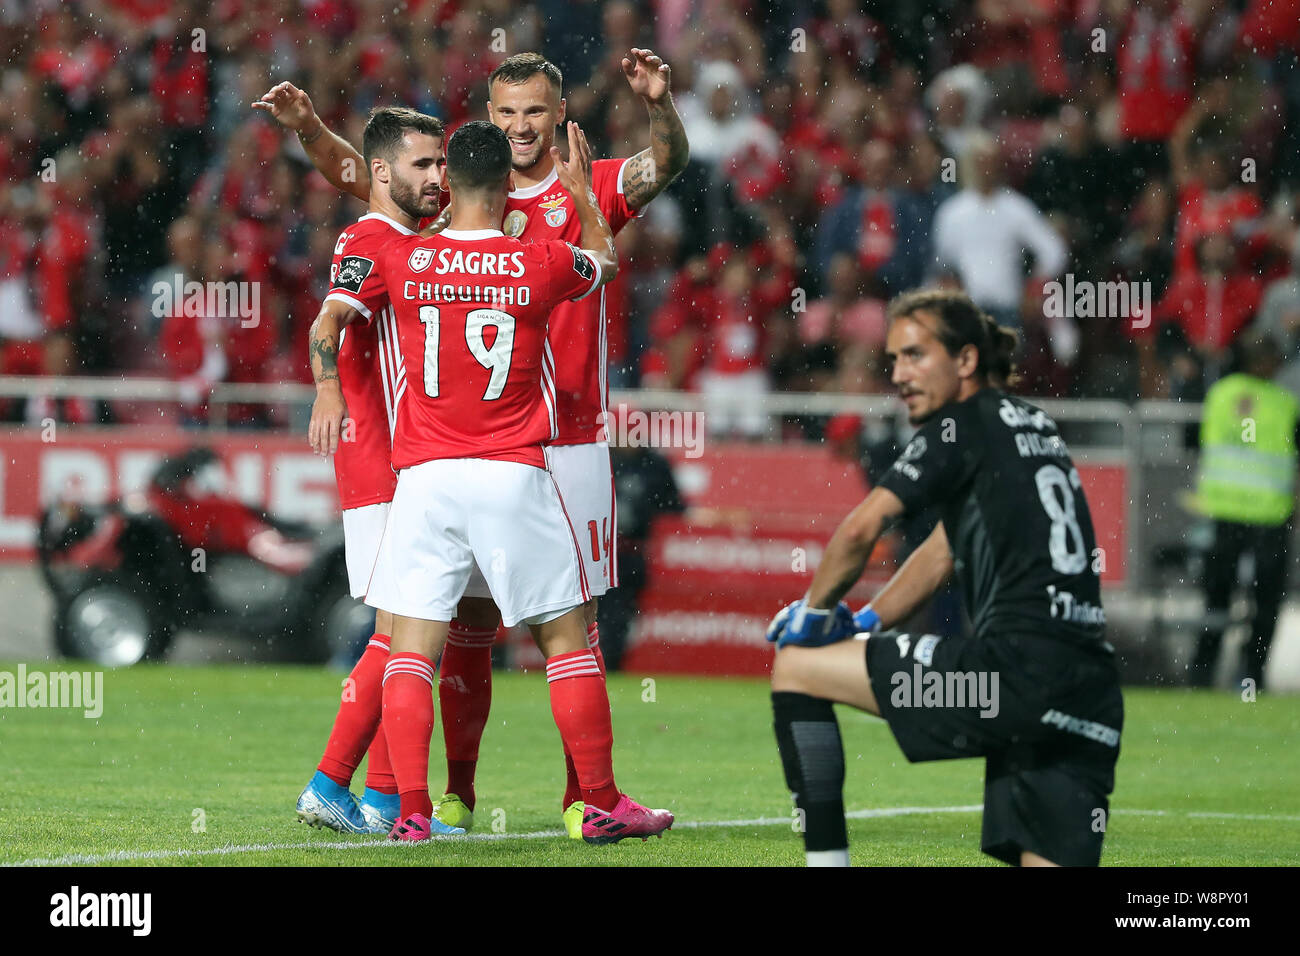 Lisbon, Portugal. 10th Aug, 2019. Benfica's Haris Seferovic (2nd R) celebrates after scoring during the Portuguese league football match between Benfica and Pacos de Ferreira in Lisbon, Portugal, on Aug. 10, 2019. Credit: Petro Fiuza/Xinhua/Alamy Live News Stock Photo